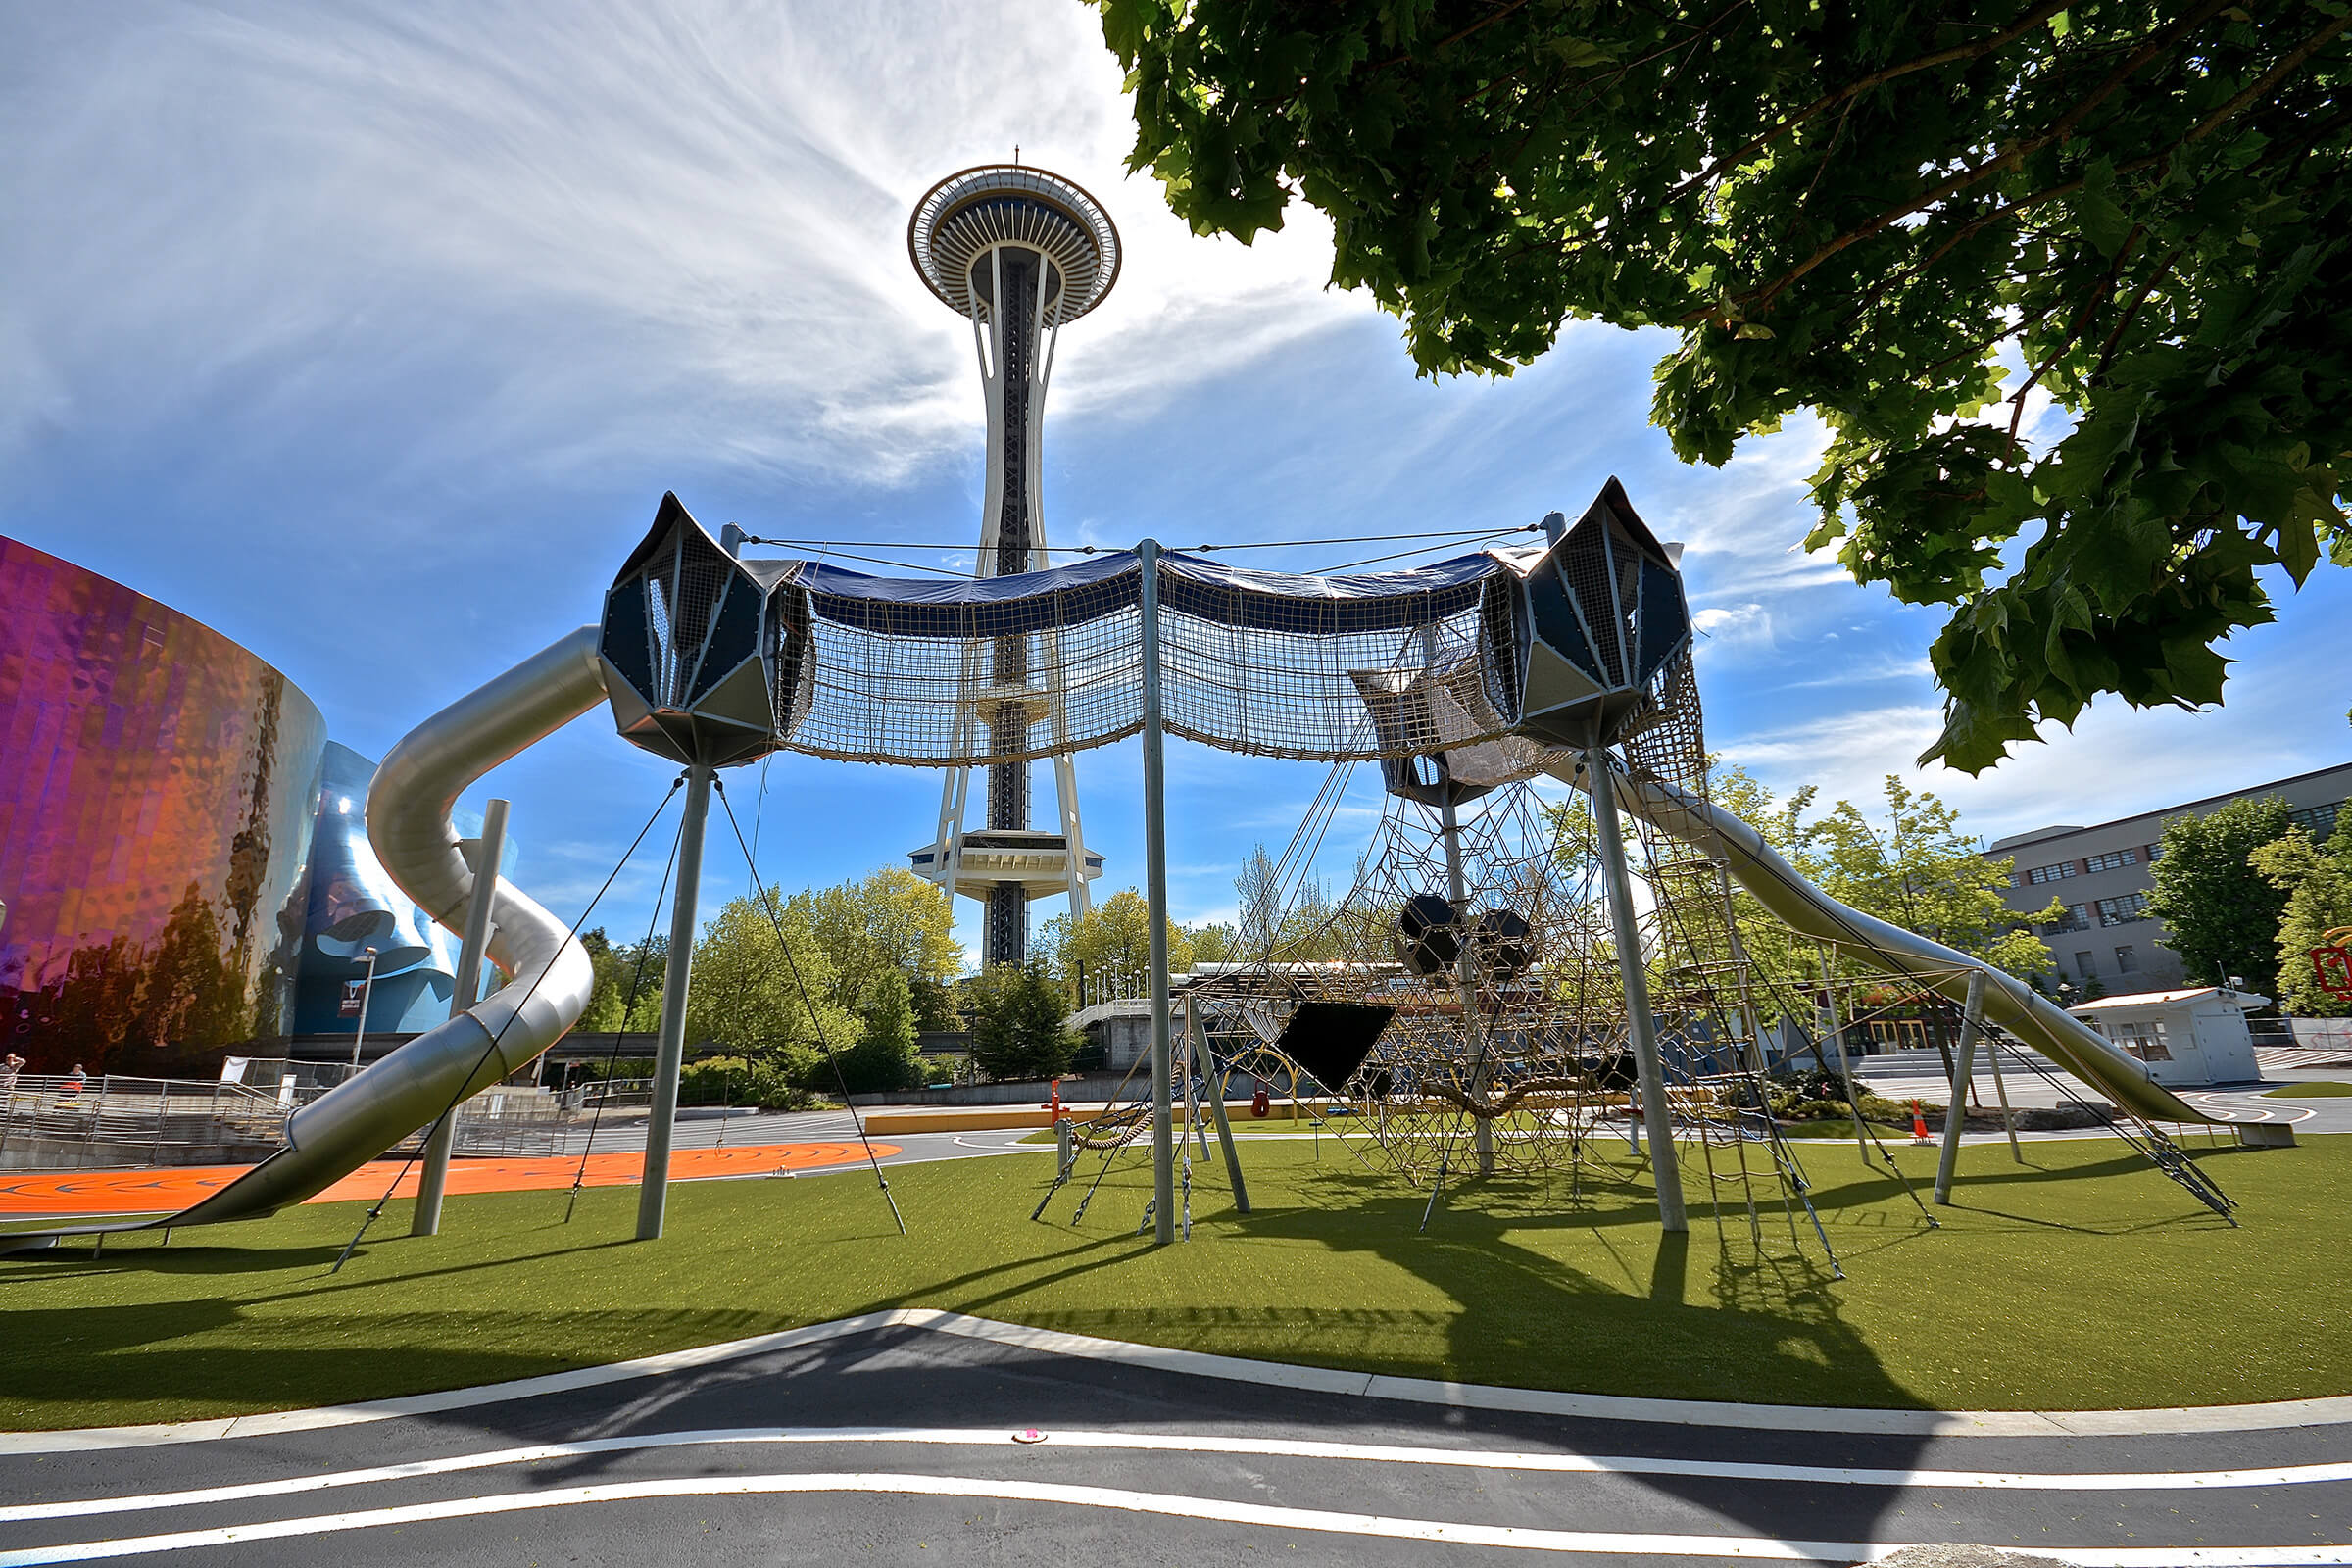 Seattle Urban Playground – Where Inspiration Meets Fitness